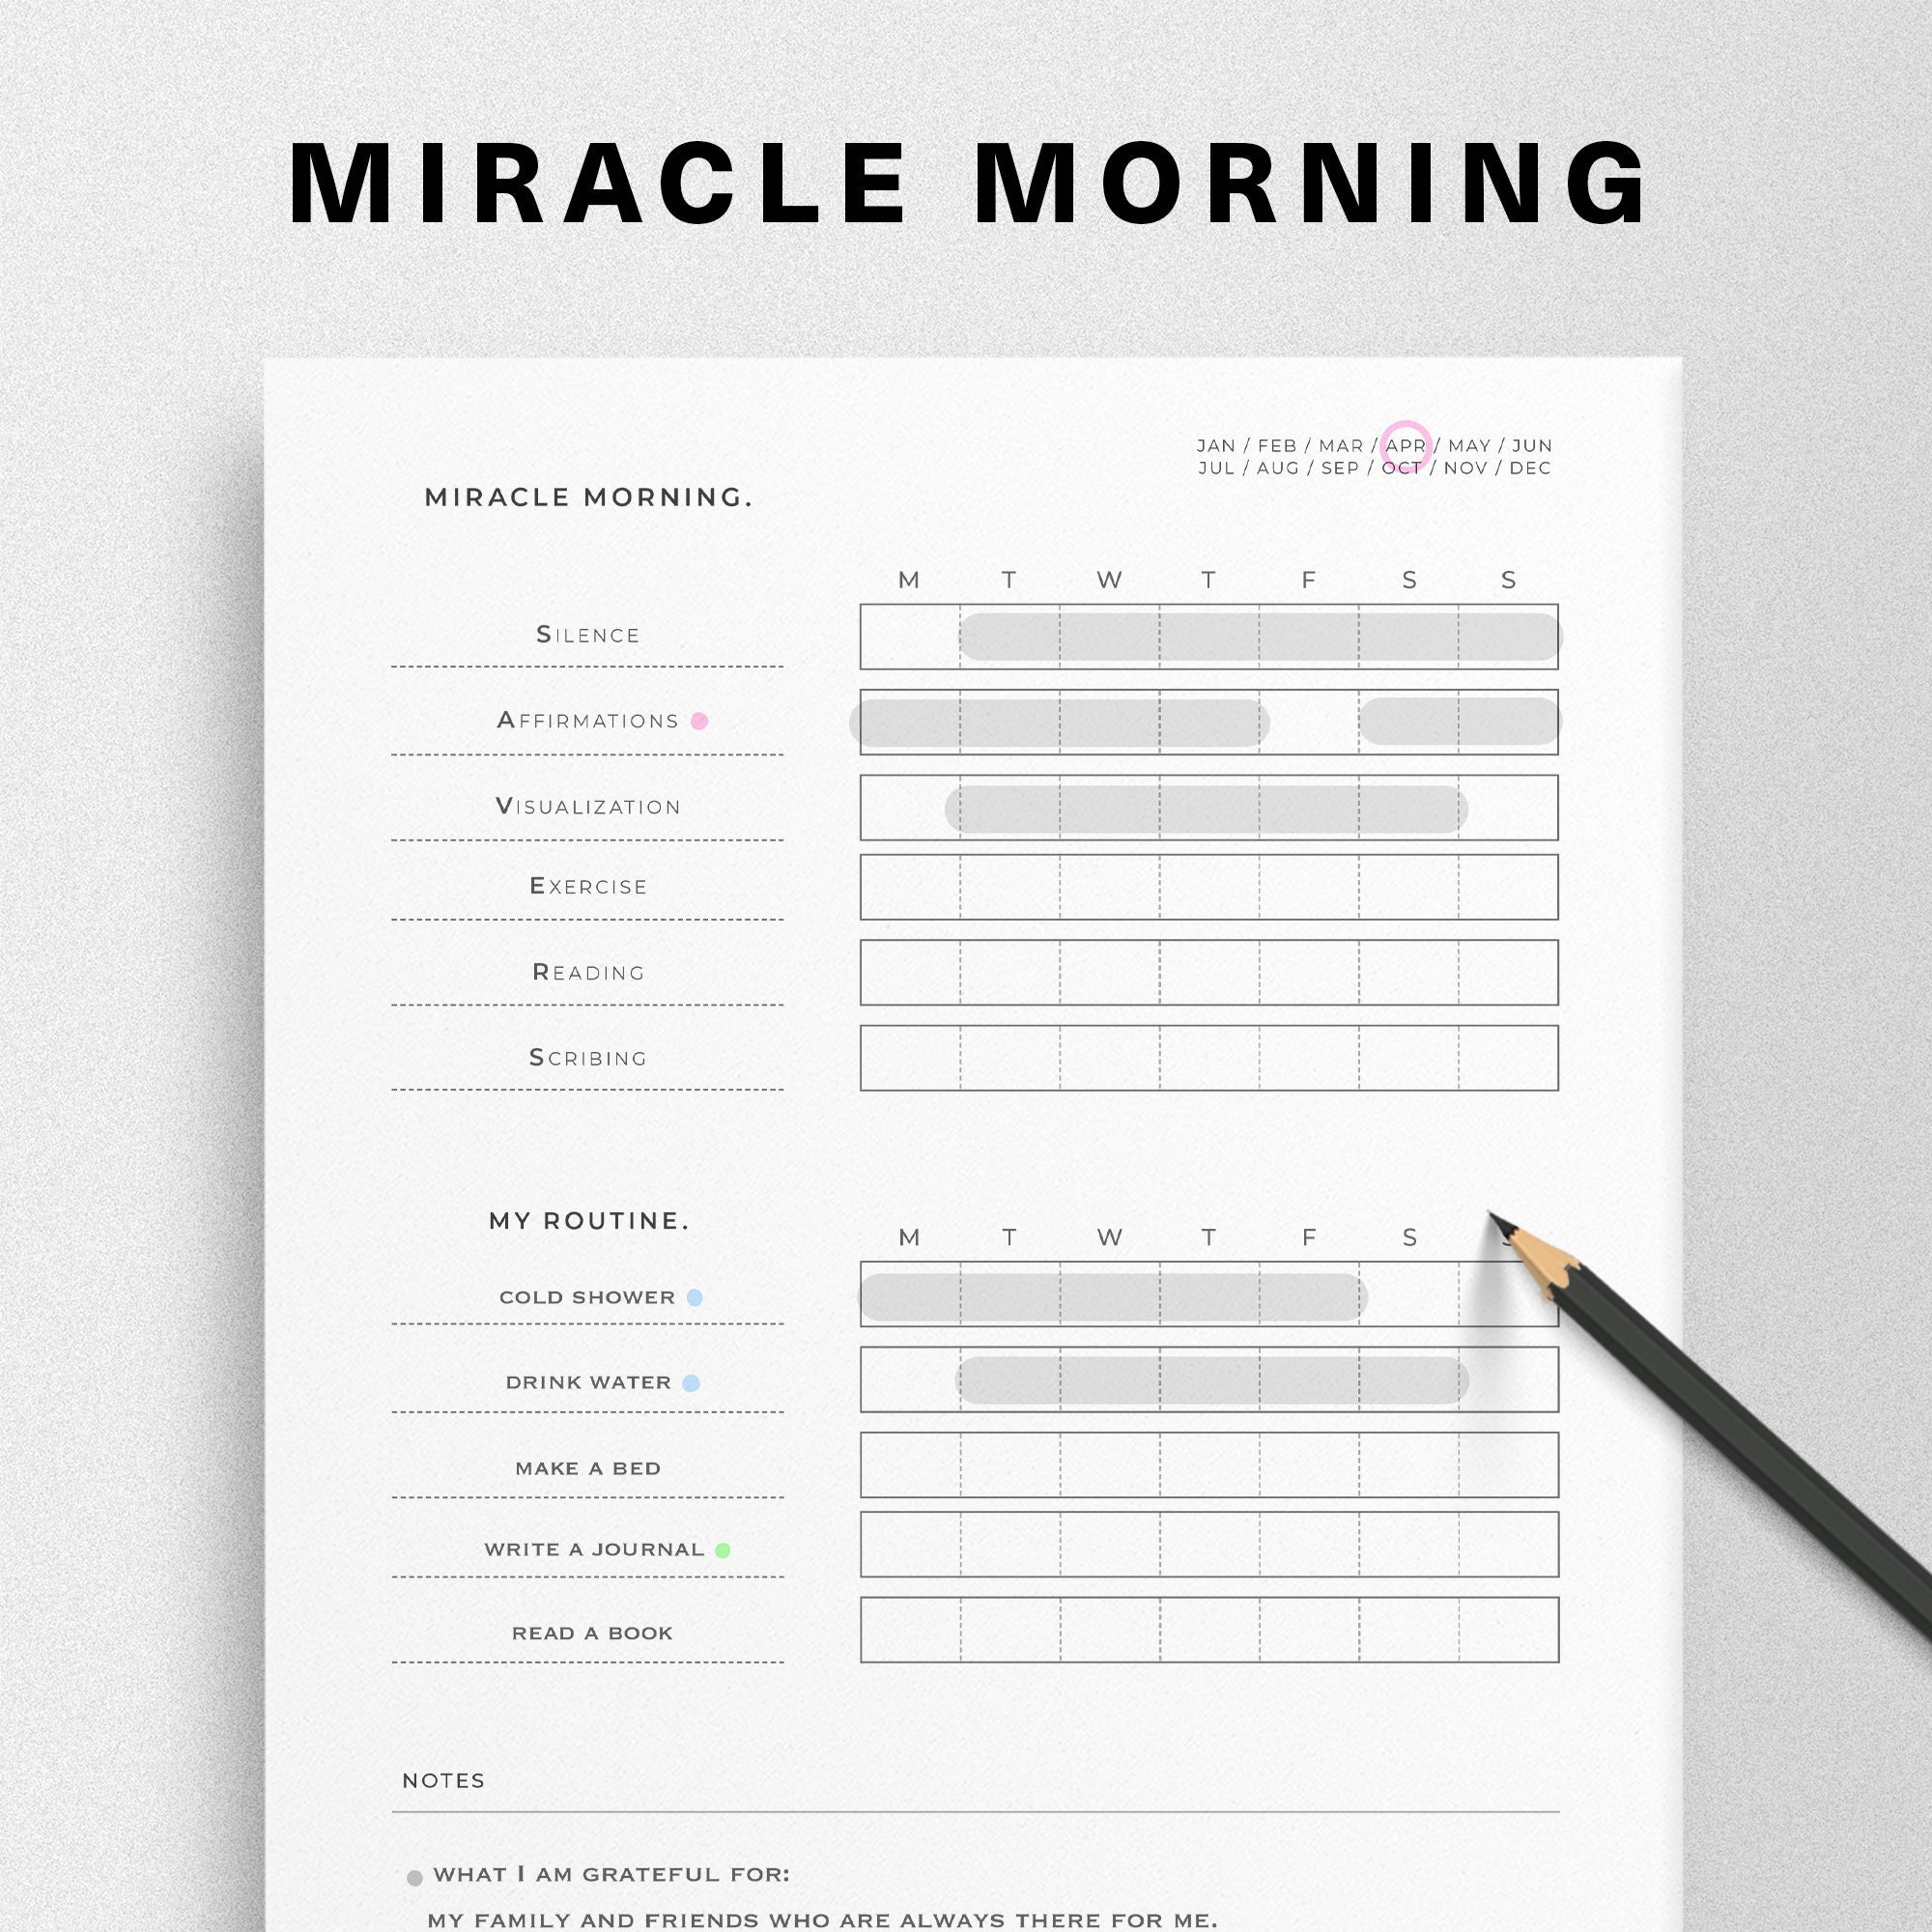 Miracle Morning S.A.V.E.R.S. Printable